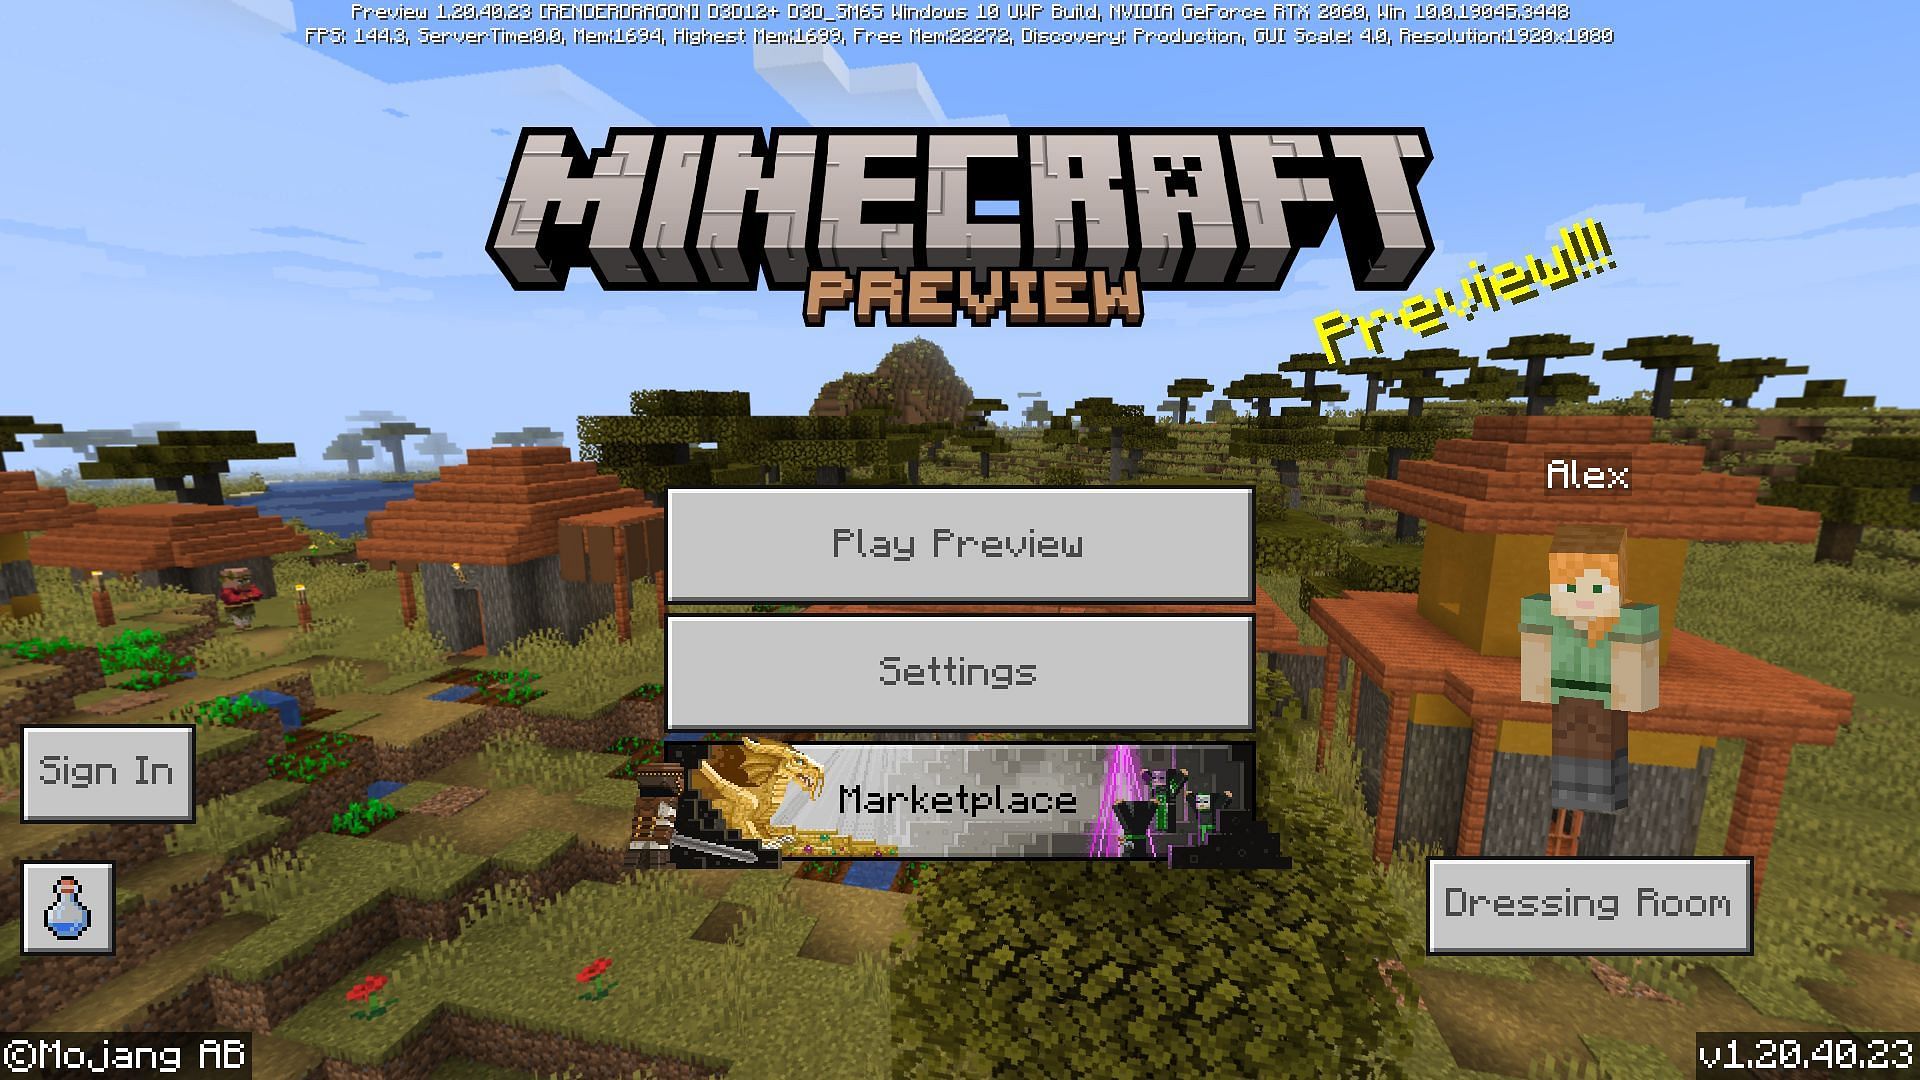 Minecraft Bedrock Edition for Android and iOS: Release date